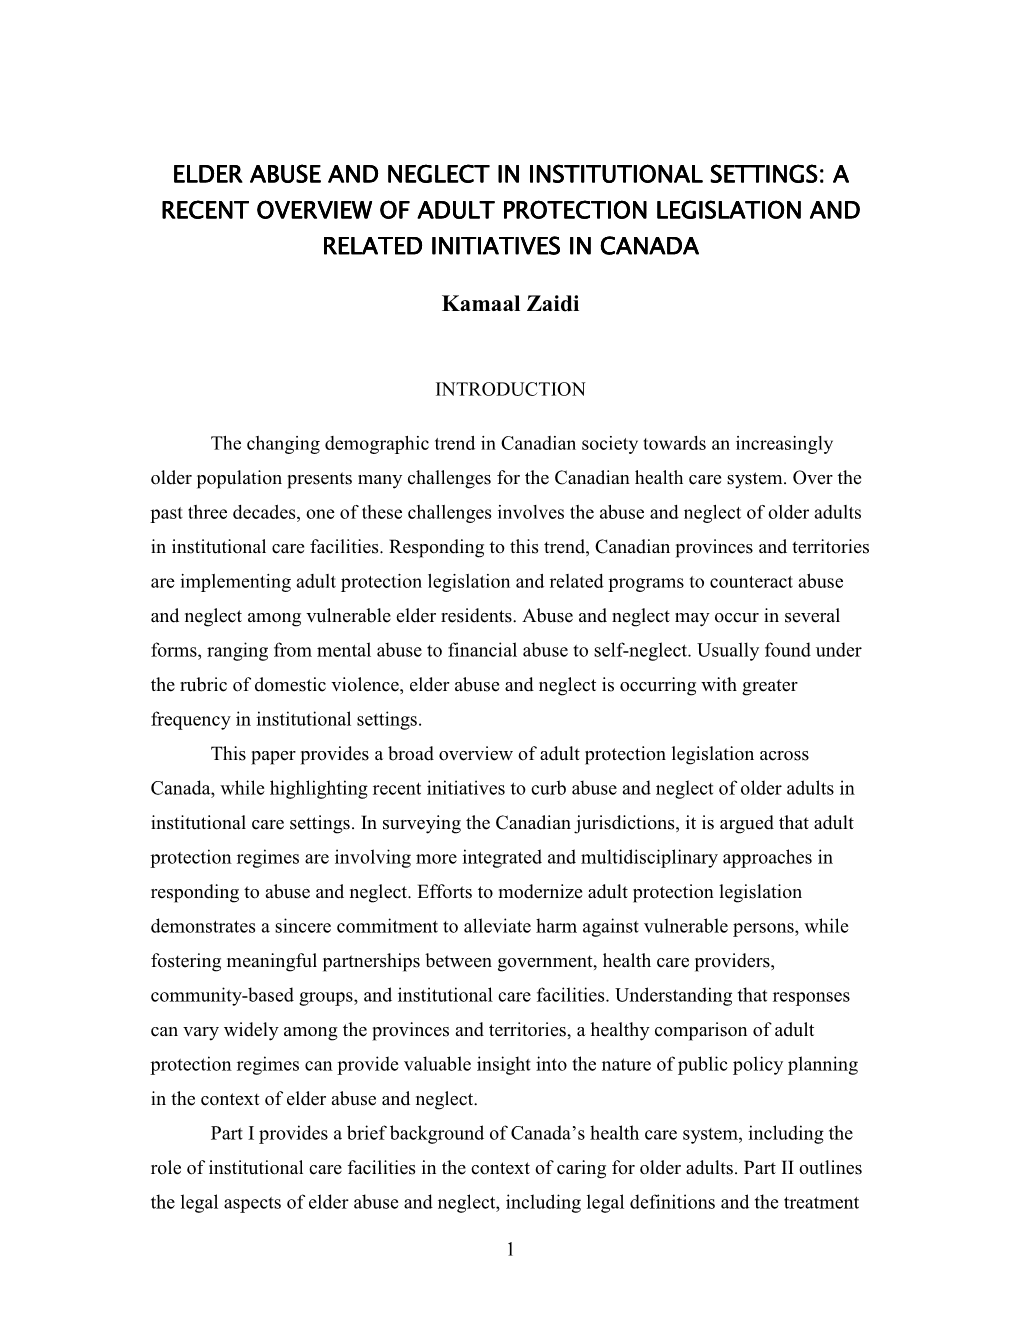 Elder Abuse and Neglect in Institutional Settings: a Recent